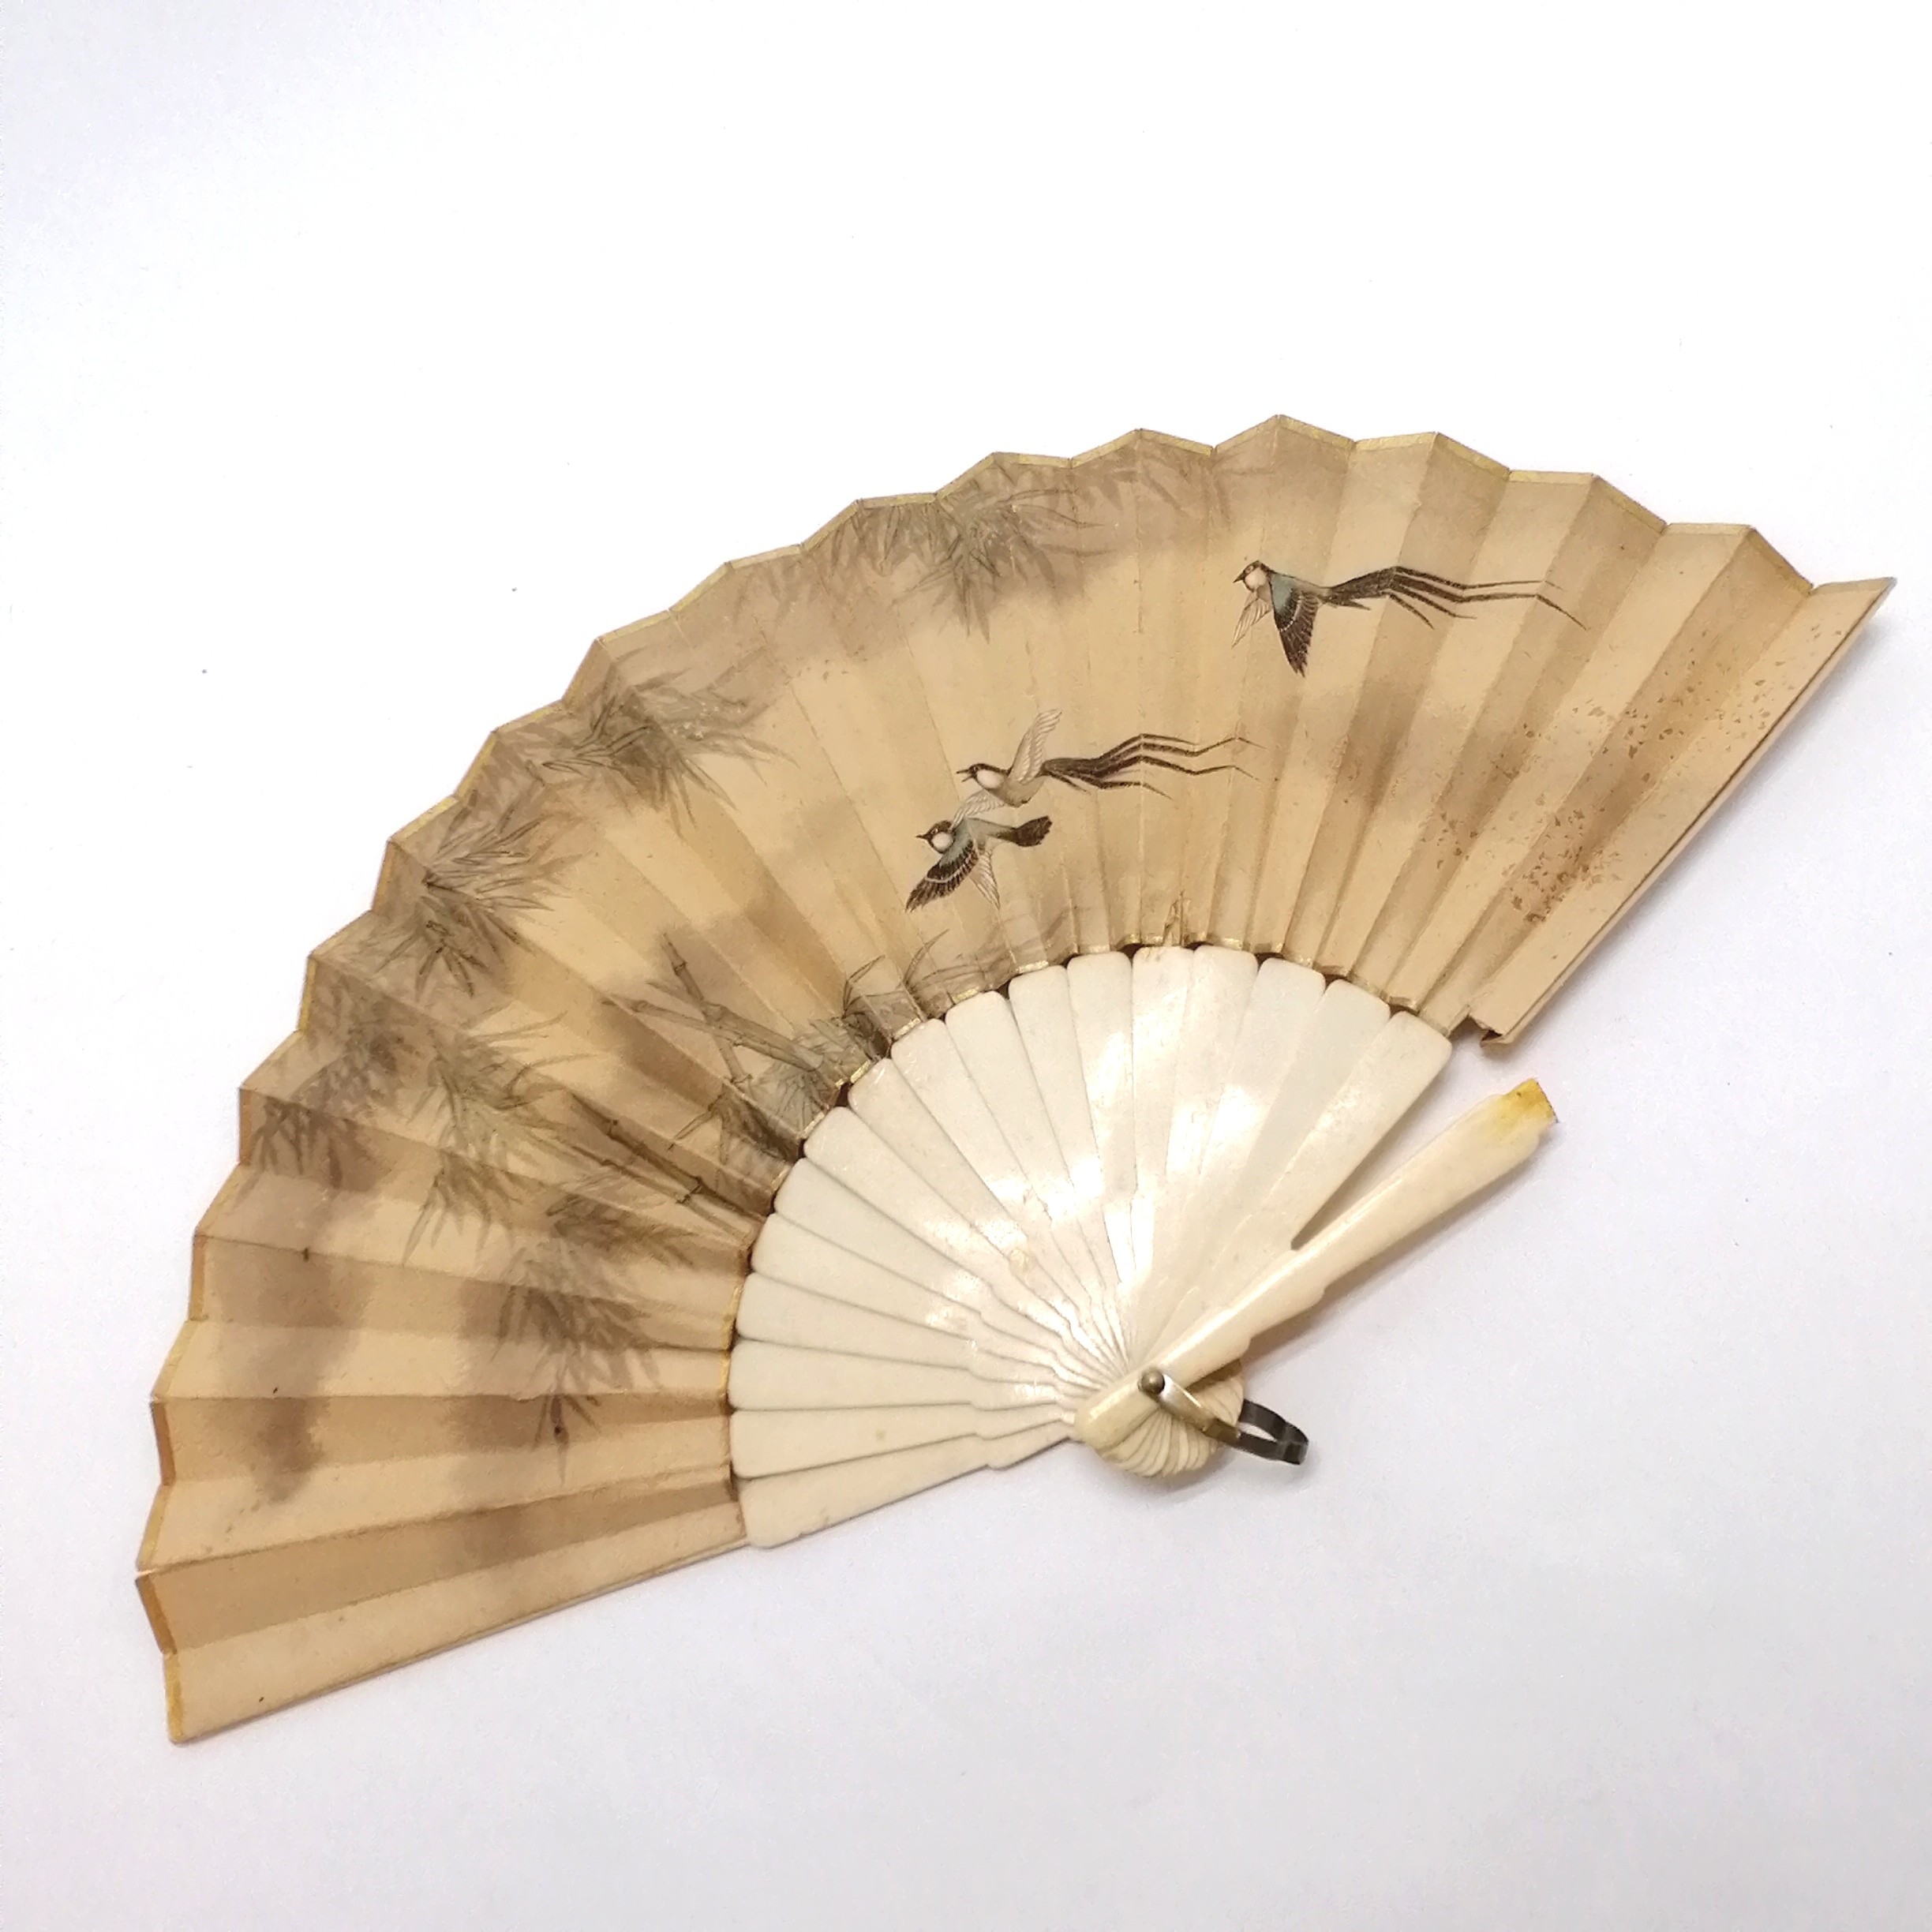 Antique Chinese hand decorated fan with antique ivory sticks (1 a/f) - 48cm across (opened) - Image 2 of 3